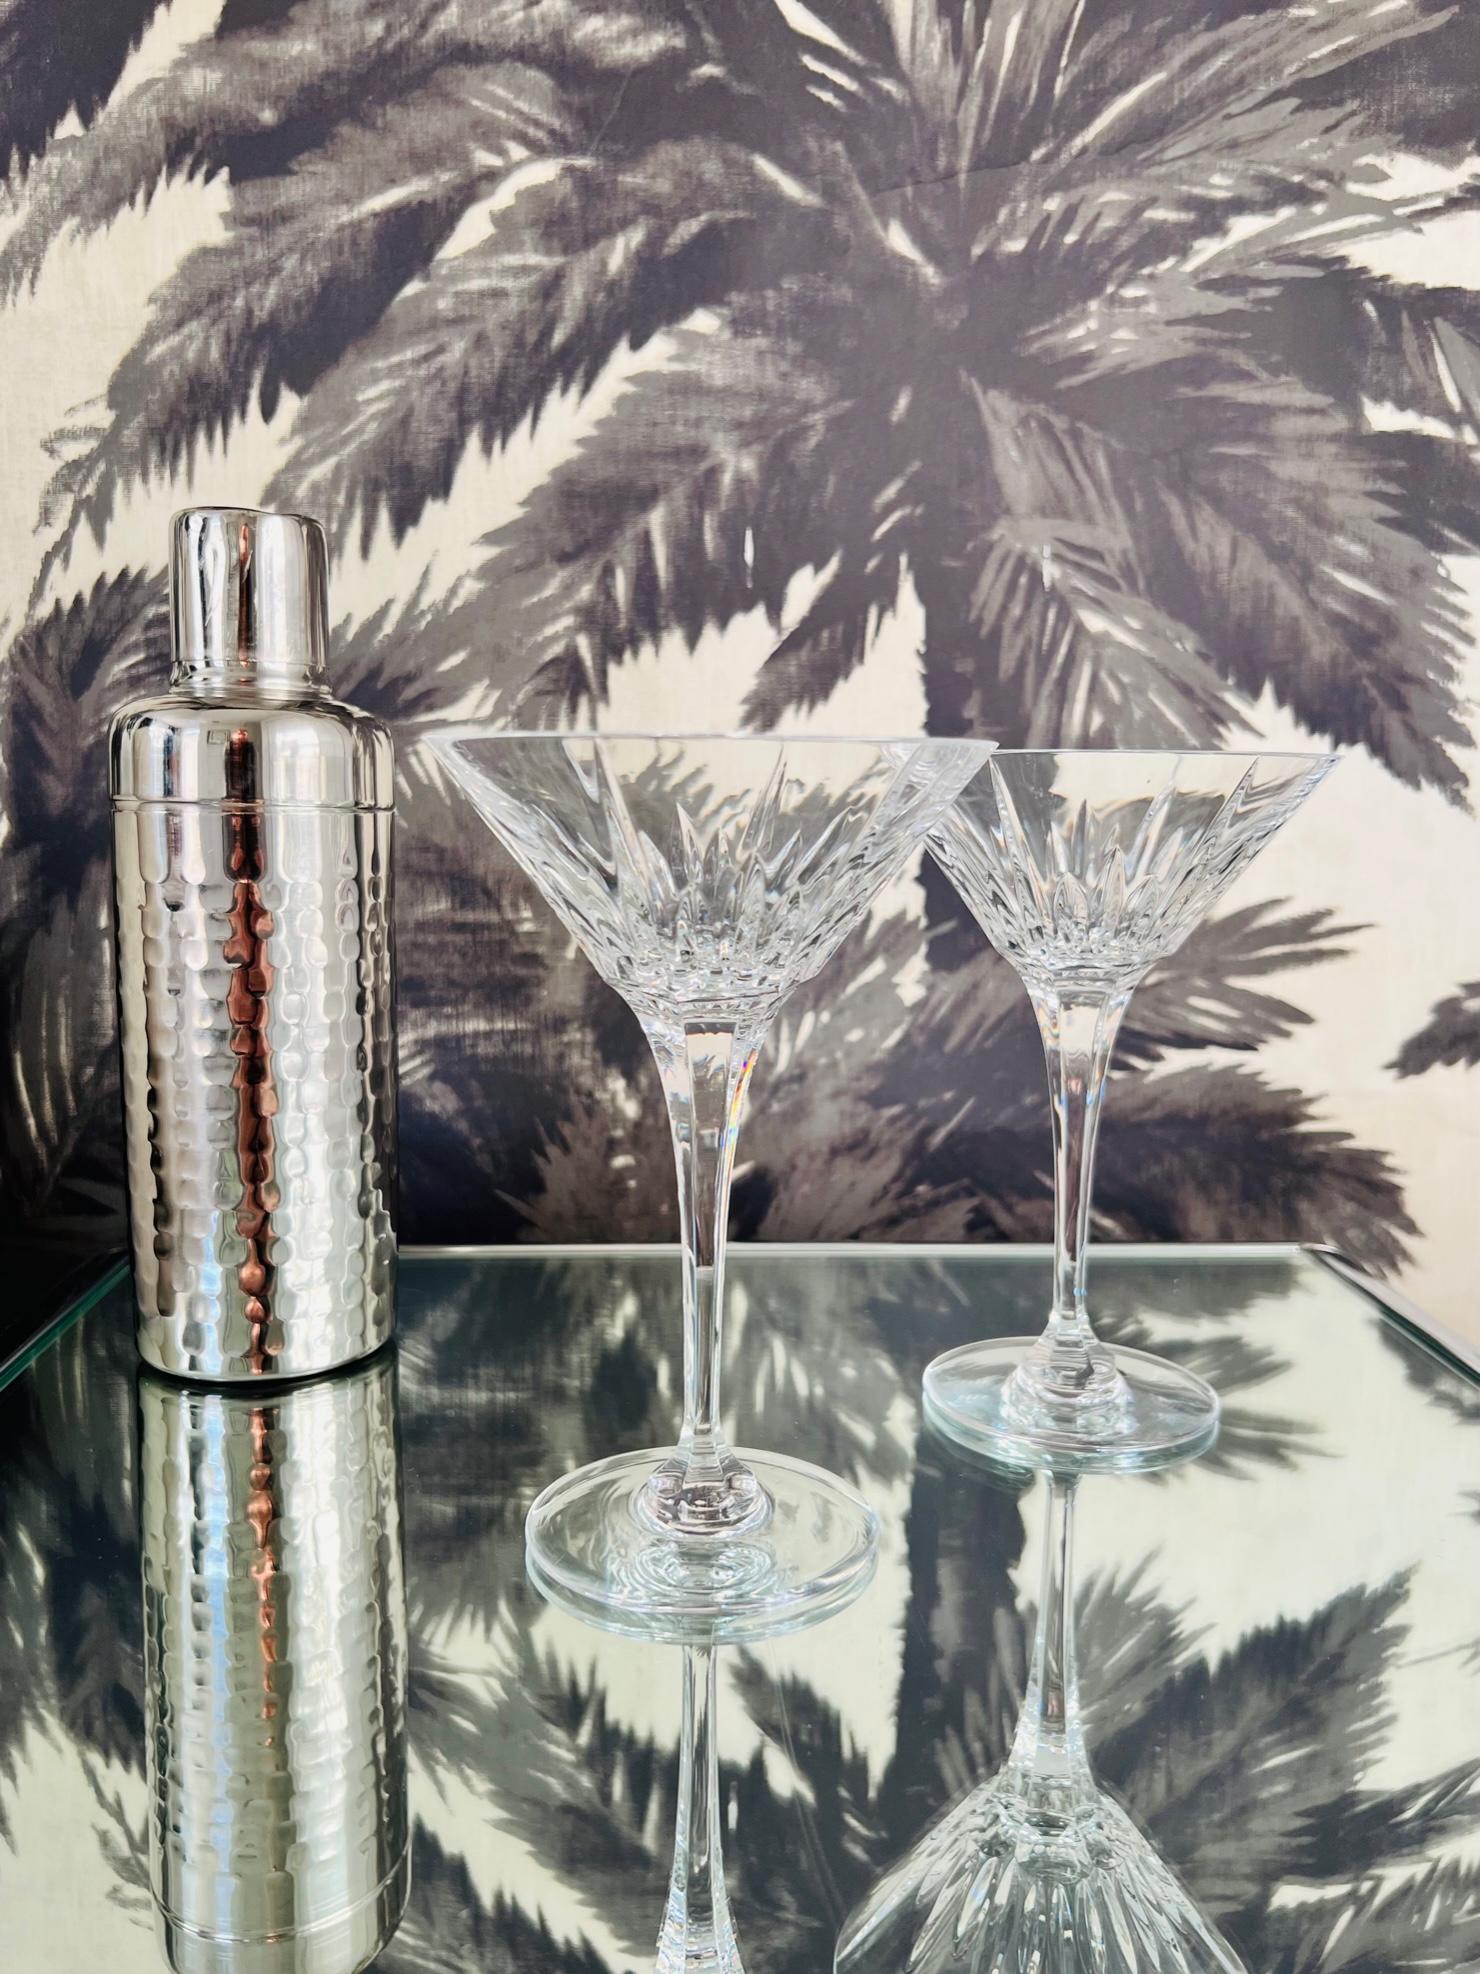 Pair of luxury crystal martini or margarita glasses from Waterford Crystal. The Lismore Collection is perhaps Waterford's most distinguished design featuring hand blown crystal with the pattern's signature diamond and wedge cuts. First introduced in